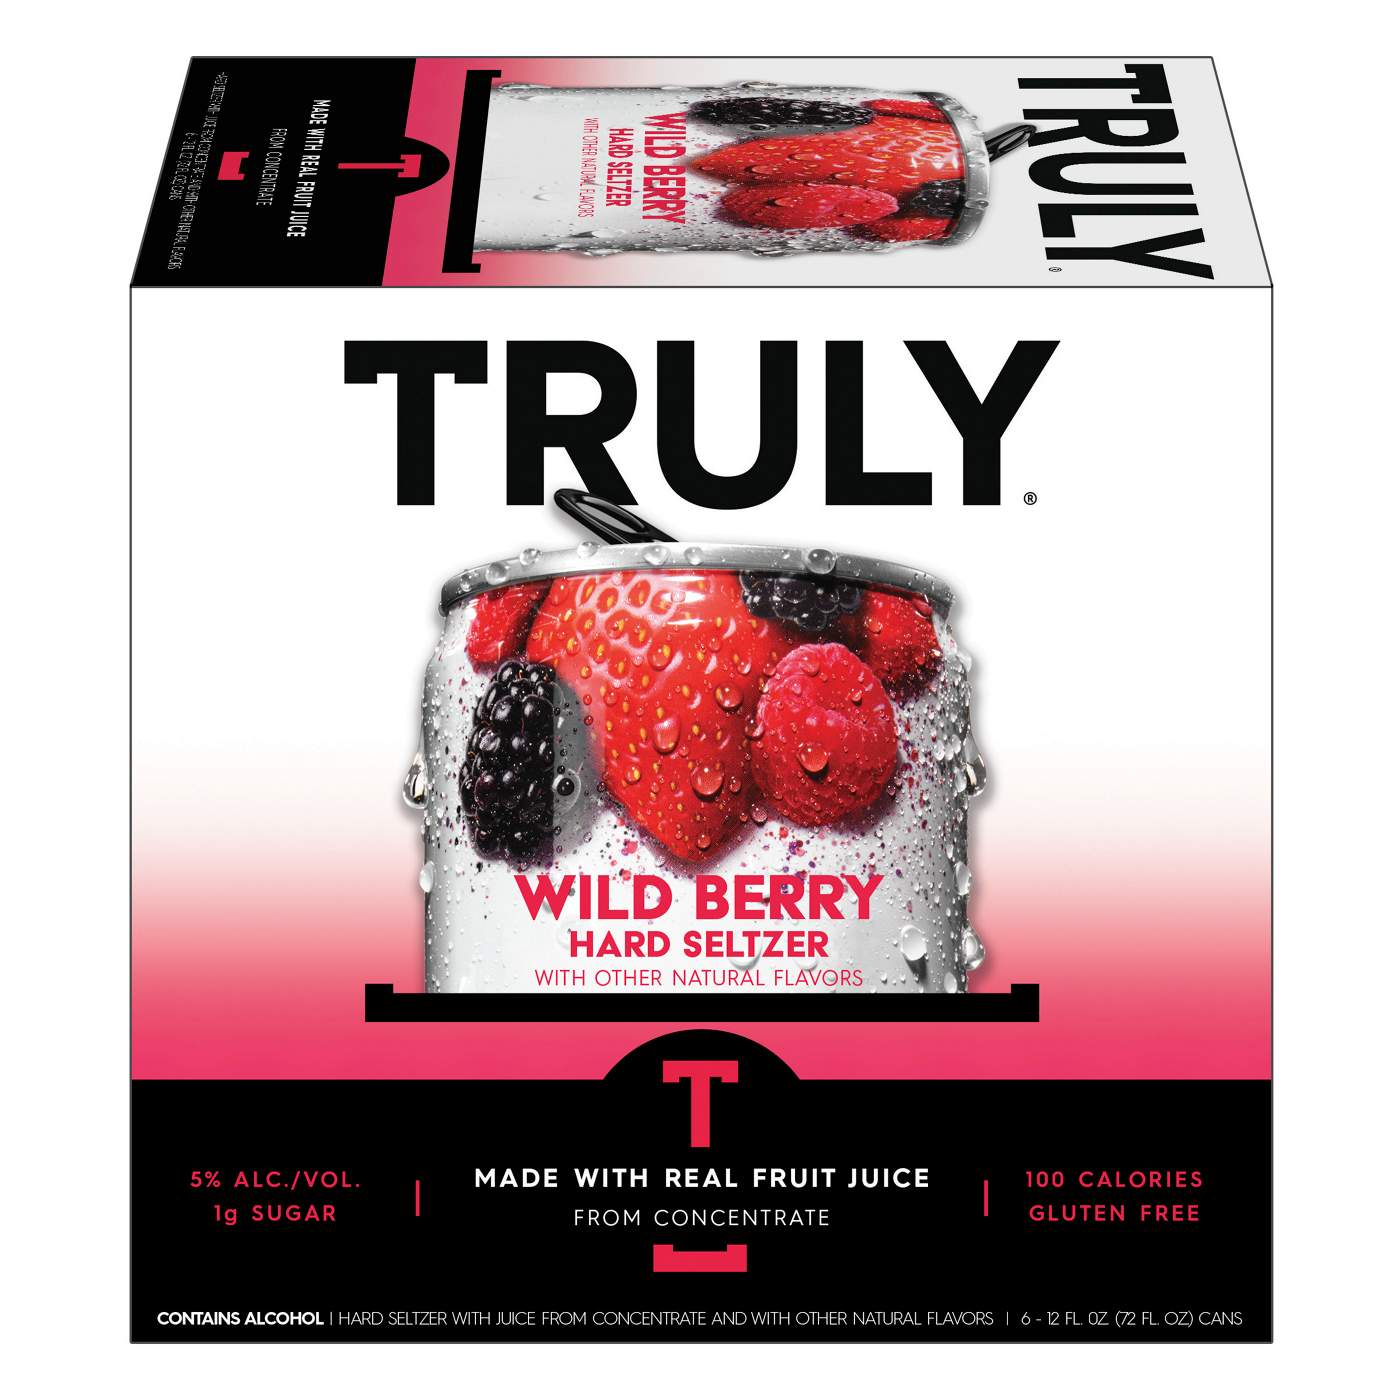 Truly Wild Berry Hard Seltzer 6 pk Cans; image 1 of 4